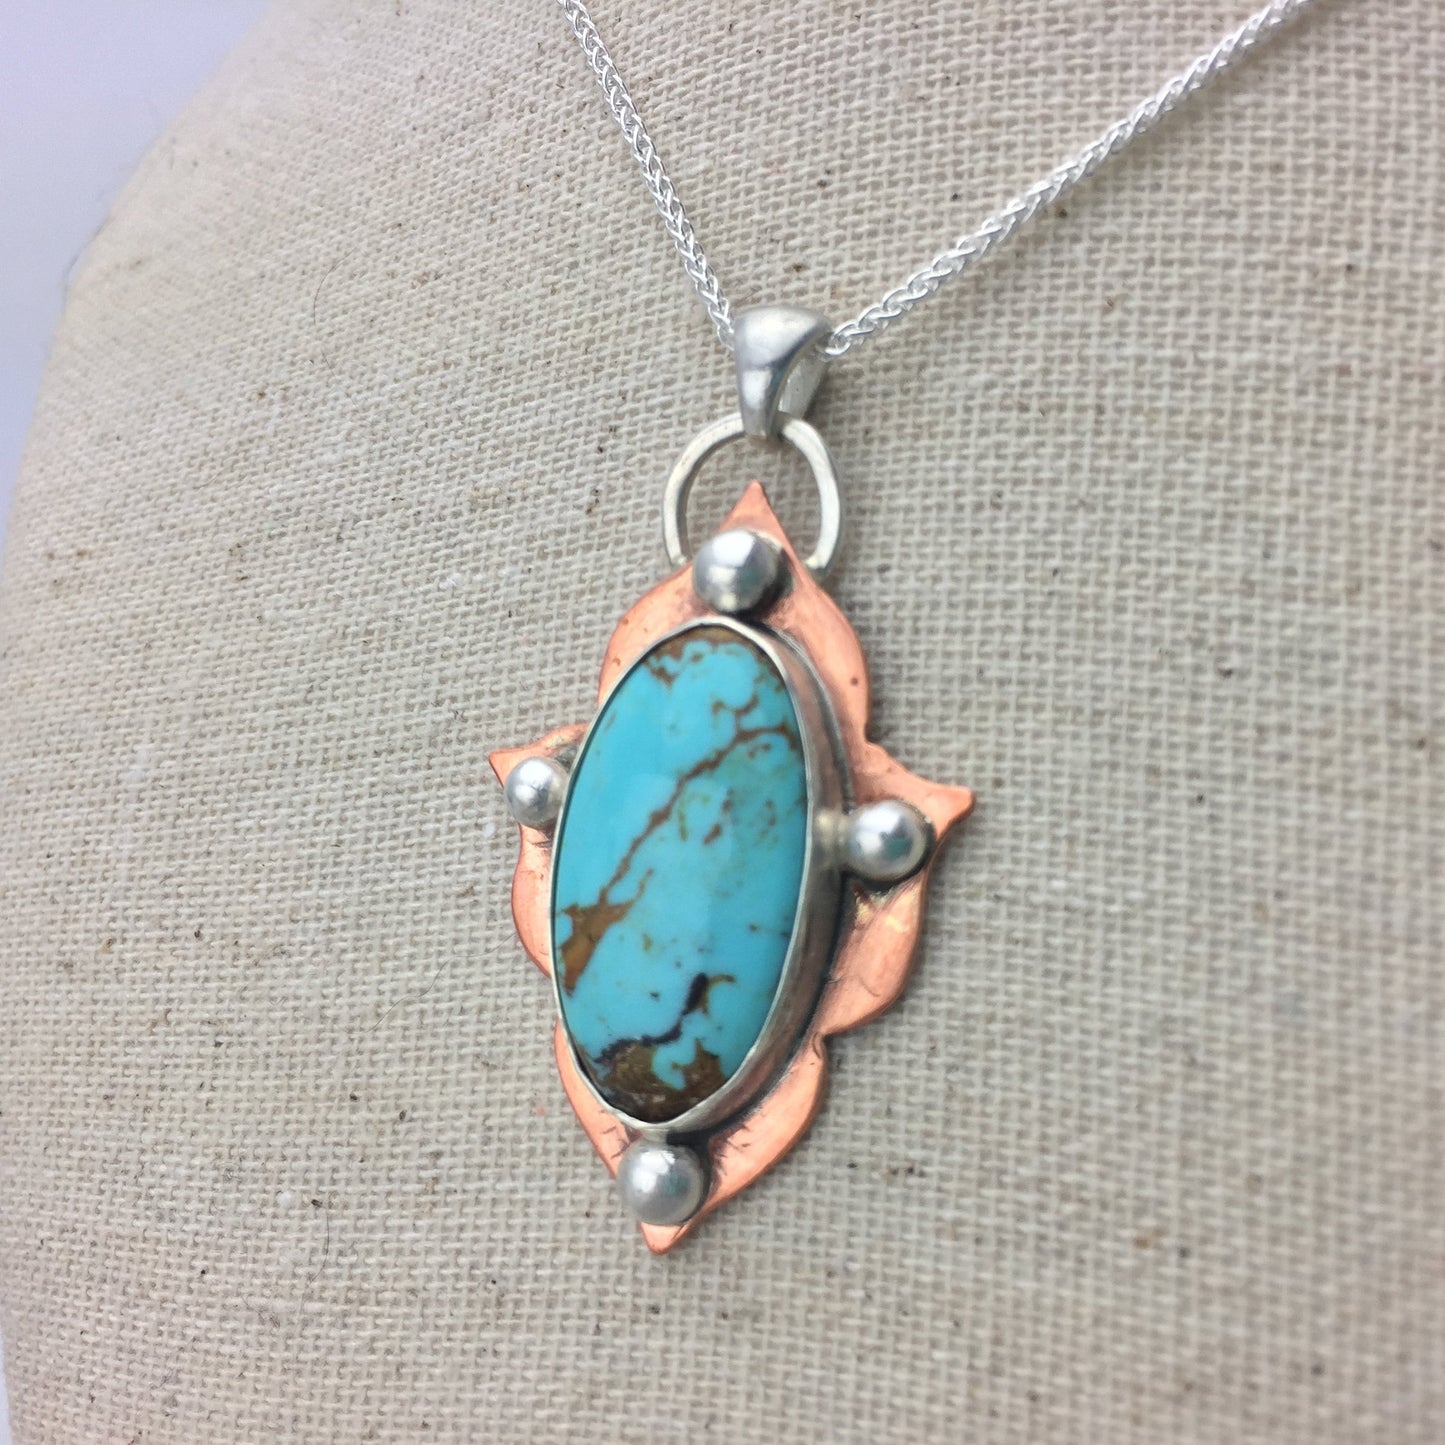 Baja Turquoise necklace in copper with sterling silver chain and accents